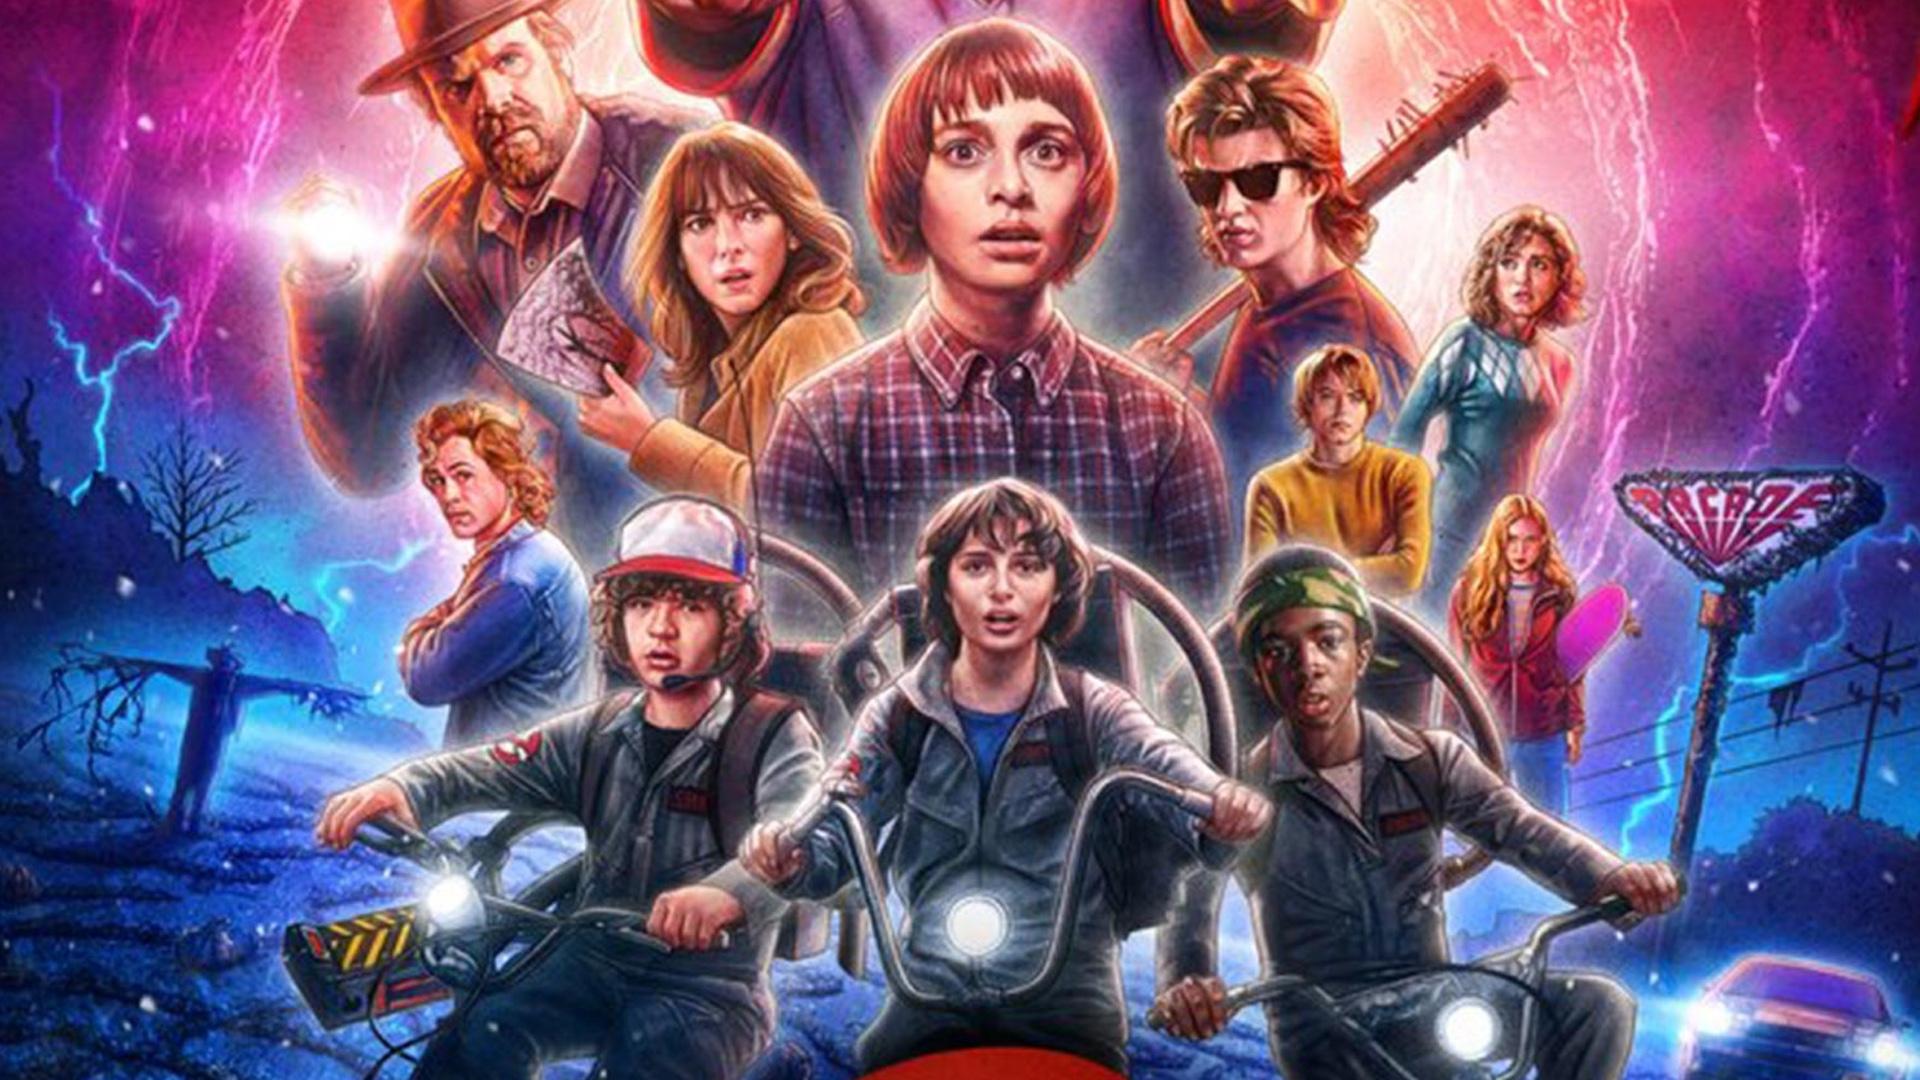 Will Byers will Get a Break in STRANGER THINGS Season 3 and it will